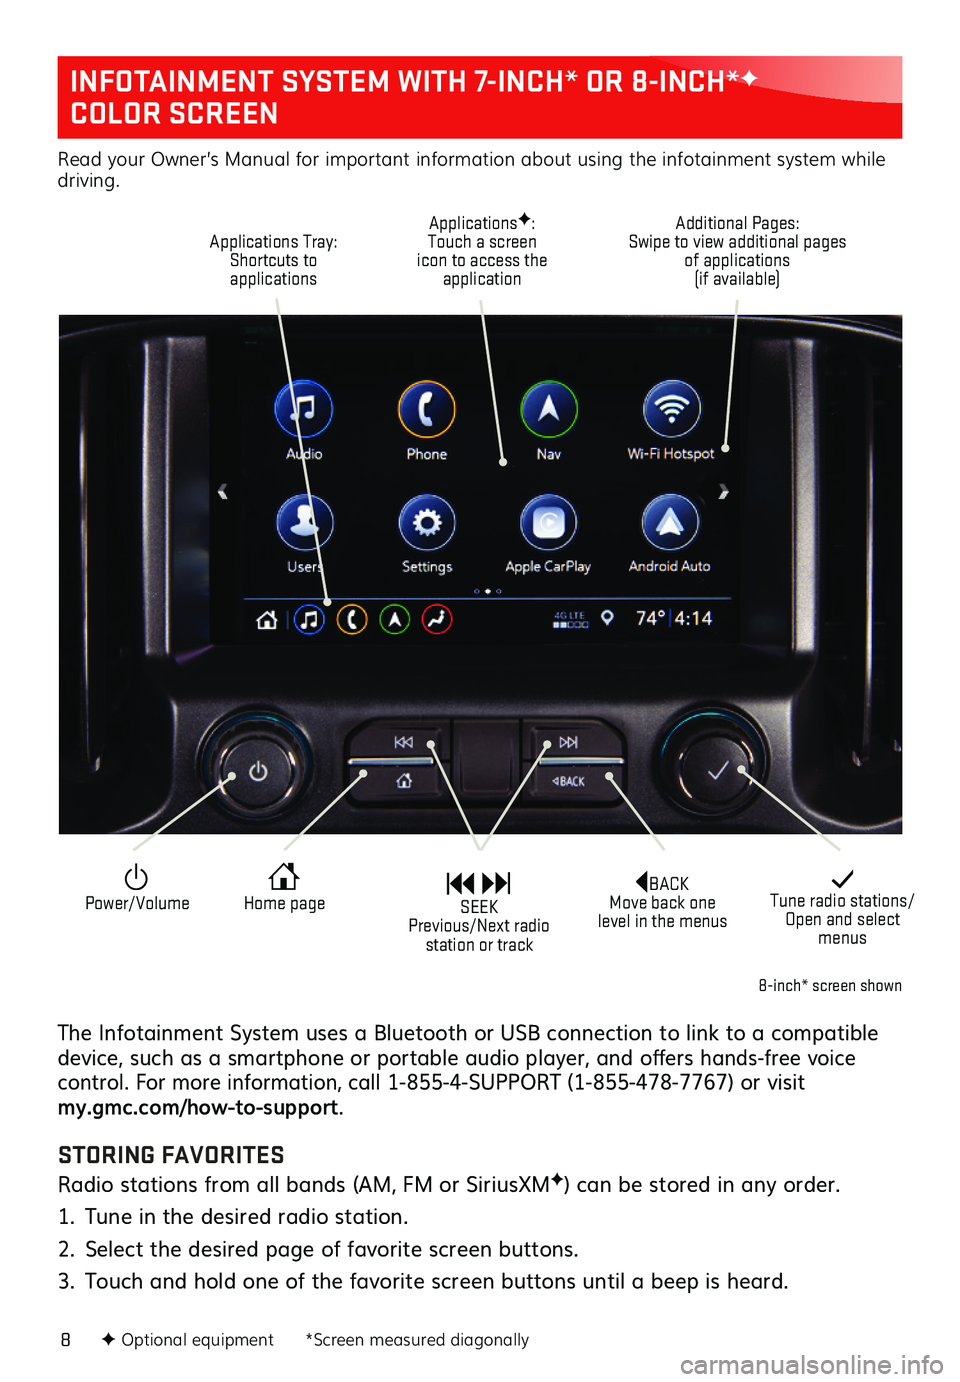 GMC CANYON 2021  Get To Know Guide 8
INFOTAINMENT SYSTEM WITH 7-INCH* OR 8-INCH*F 
COLOR SCREEN
The Infotainment System uses a Bluetooth or USB connection to link to a compatible device, such as a smartphone or portable audio player, a